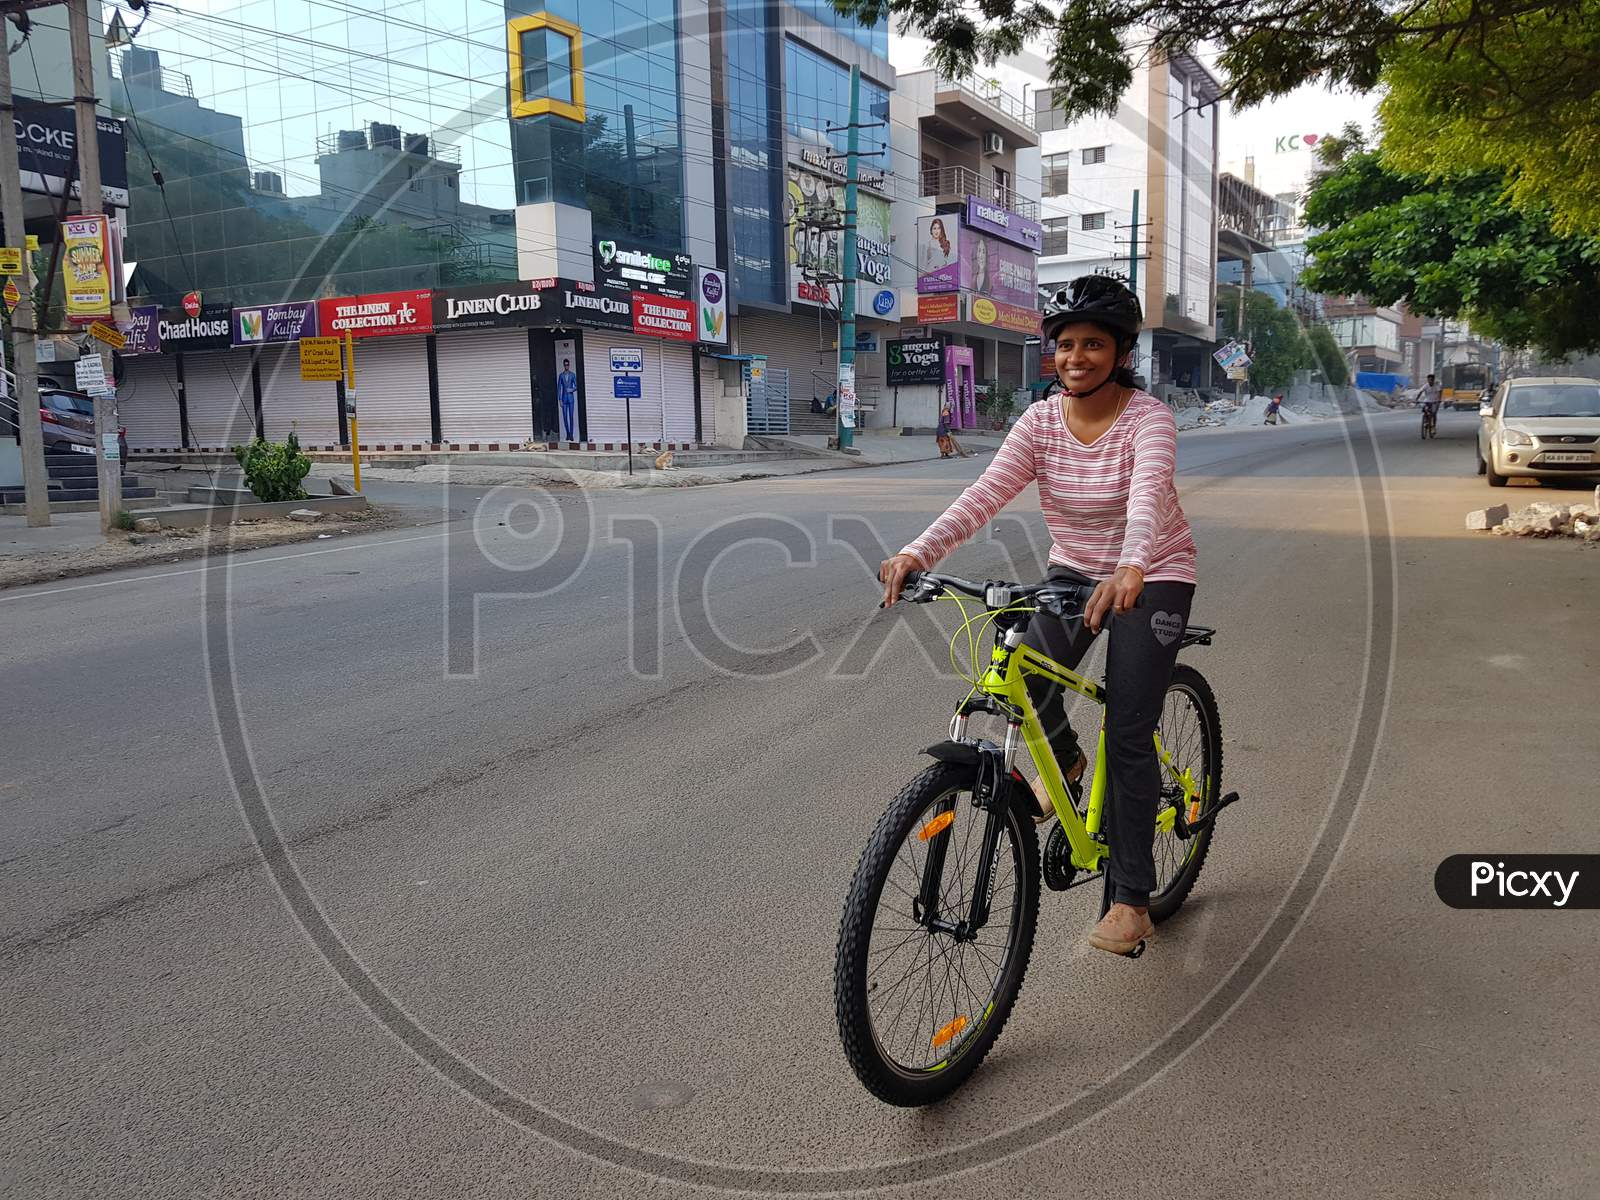 Bangalore, Karnataka, India - 1-April-2018: A woman cycling on the road early in the morning on an empty road in Bangalore, Karnataka, India